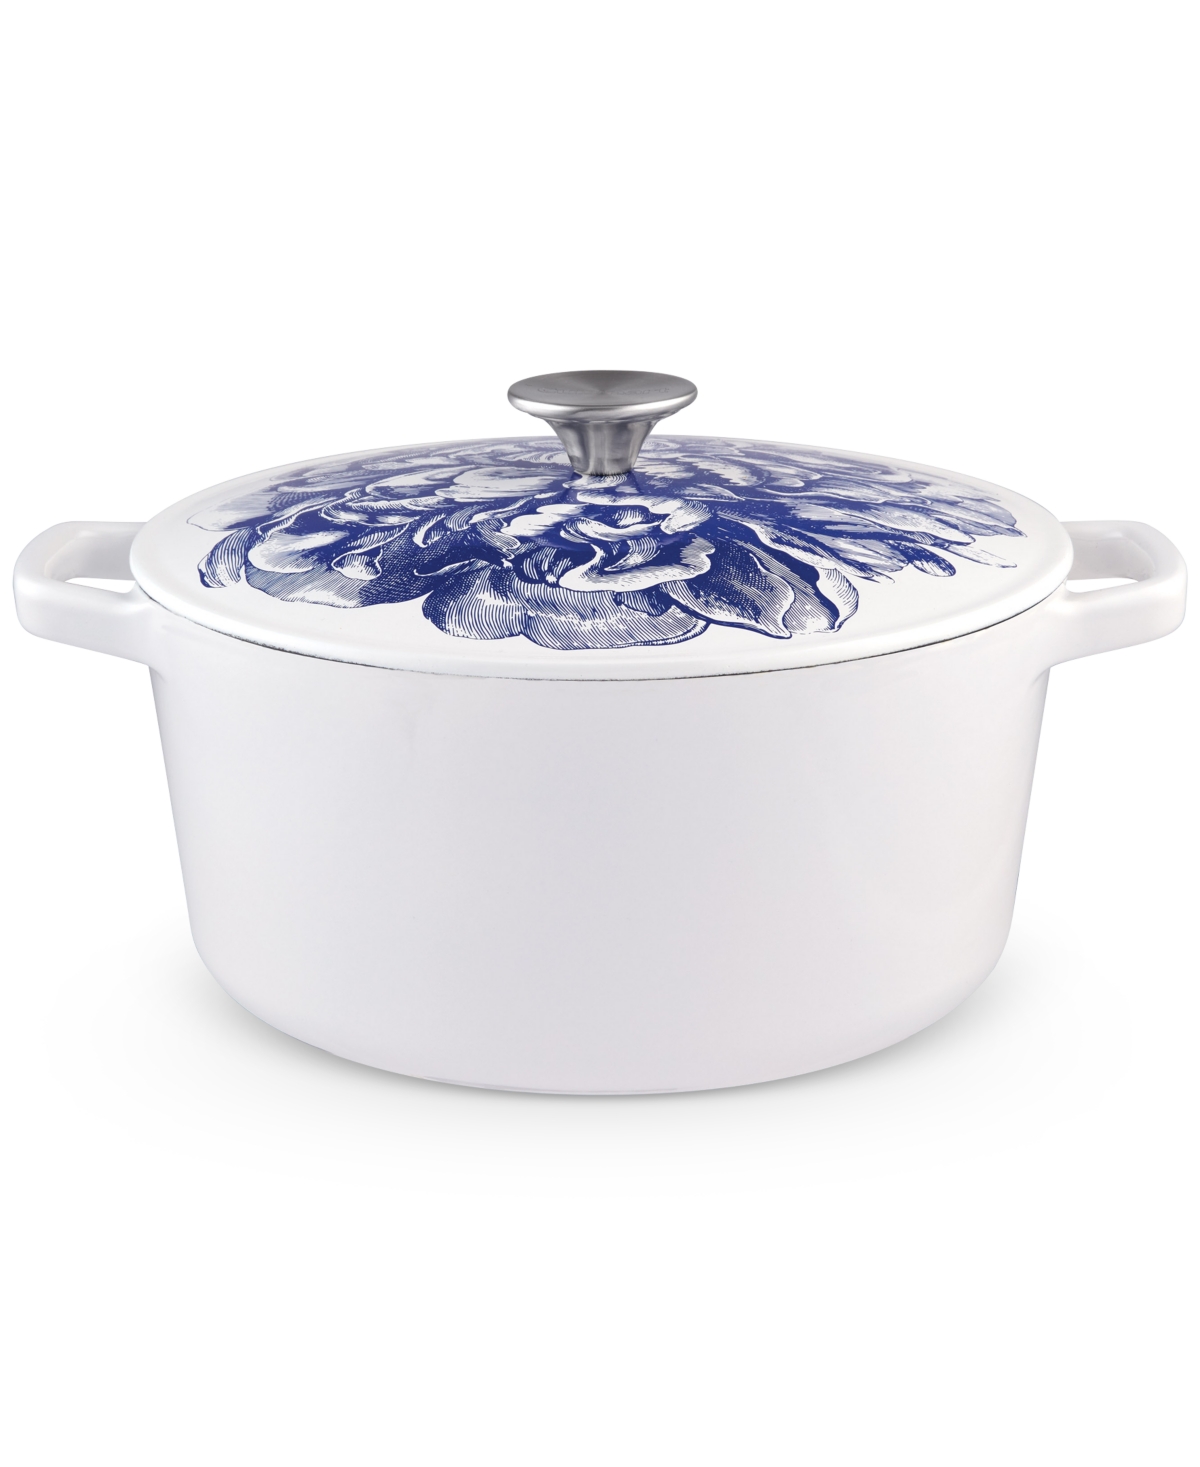 Cuisinart Caskata Enameled Cast Iron 5 Qt. Round Casserole In White With Blue Accents